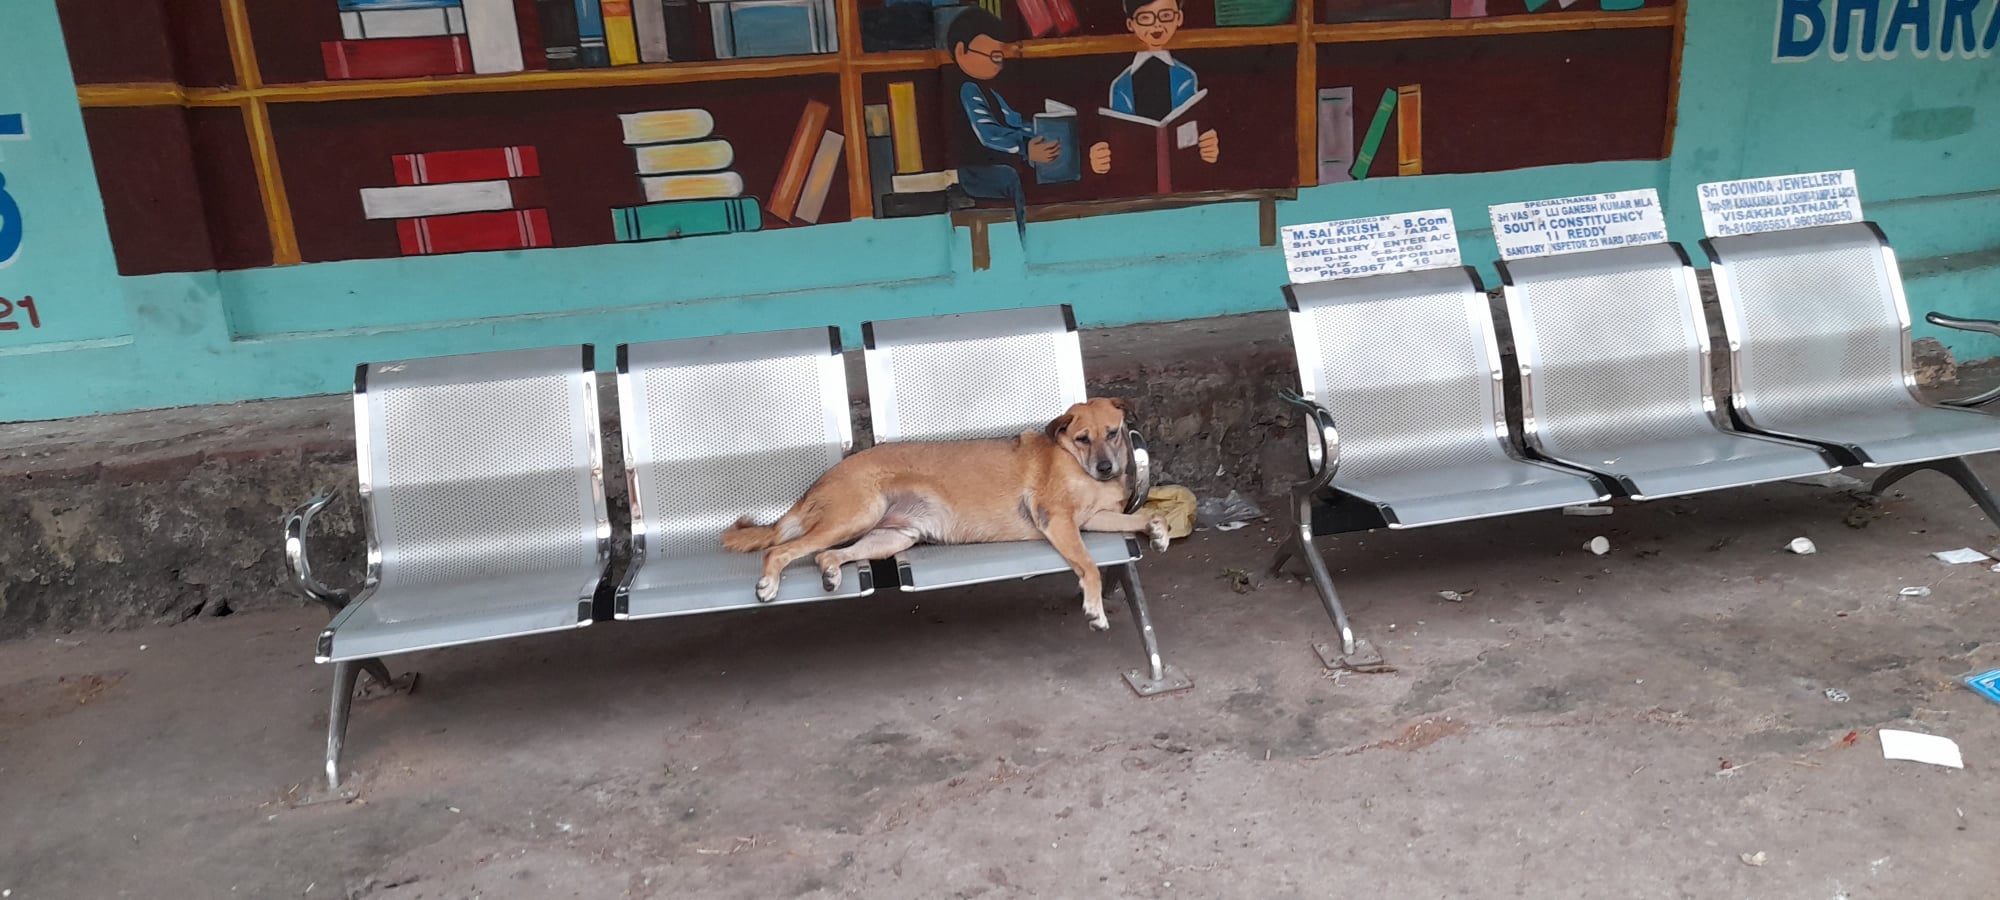 The lockdown led to food scarcity for street animals